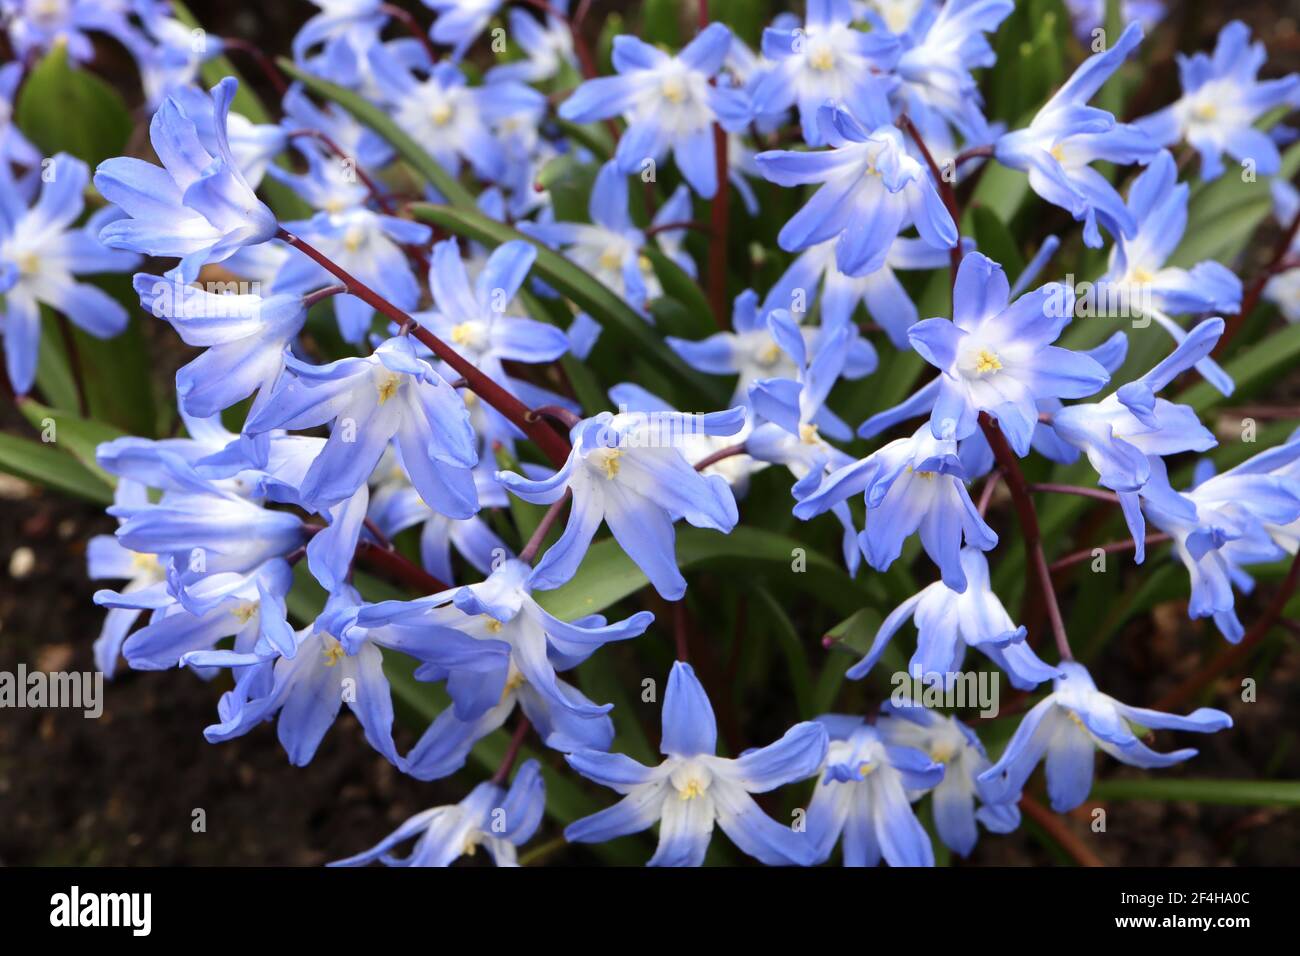 Scilla forbesii (chionodoxa) Forbes’ squill – blue open bell-shaped flowers with white eye,  March, England, UK Stock Photo